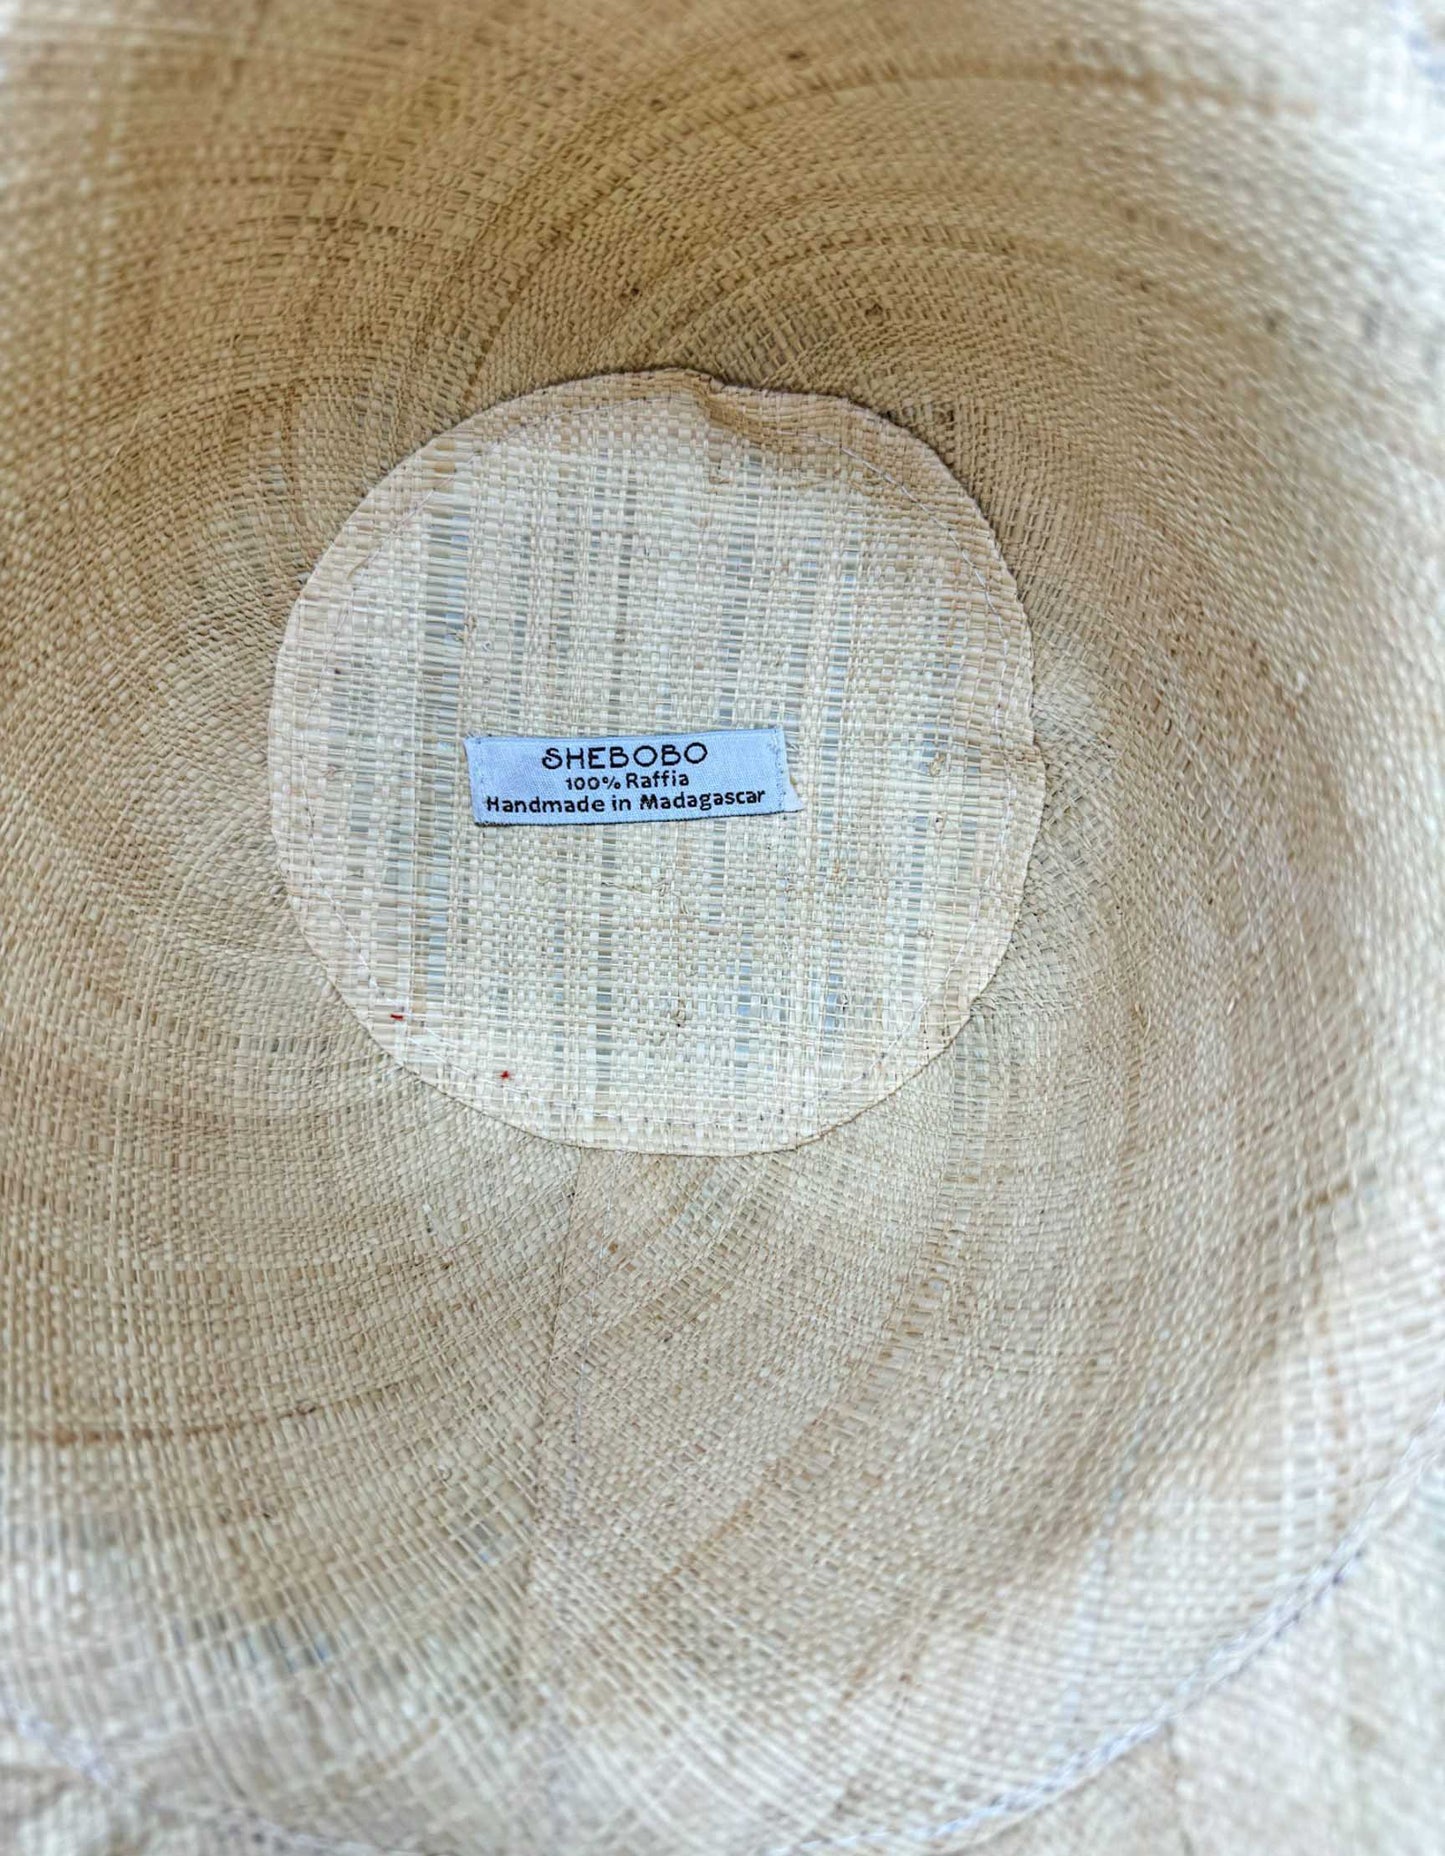 SHEBOBO 5" Wide Brim Two Tone Packable Straw Sun Hat w/ Tags - One Size